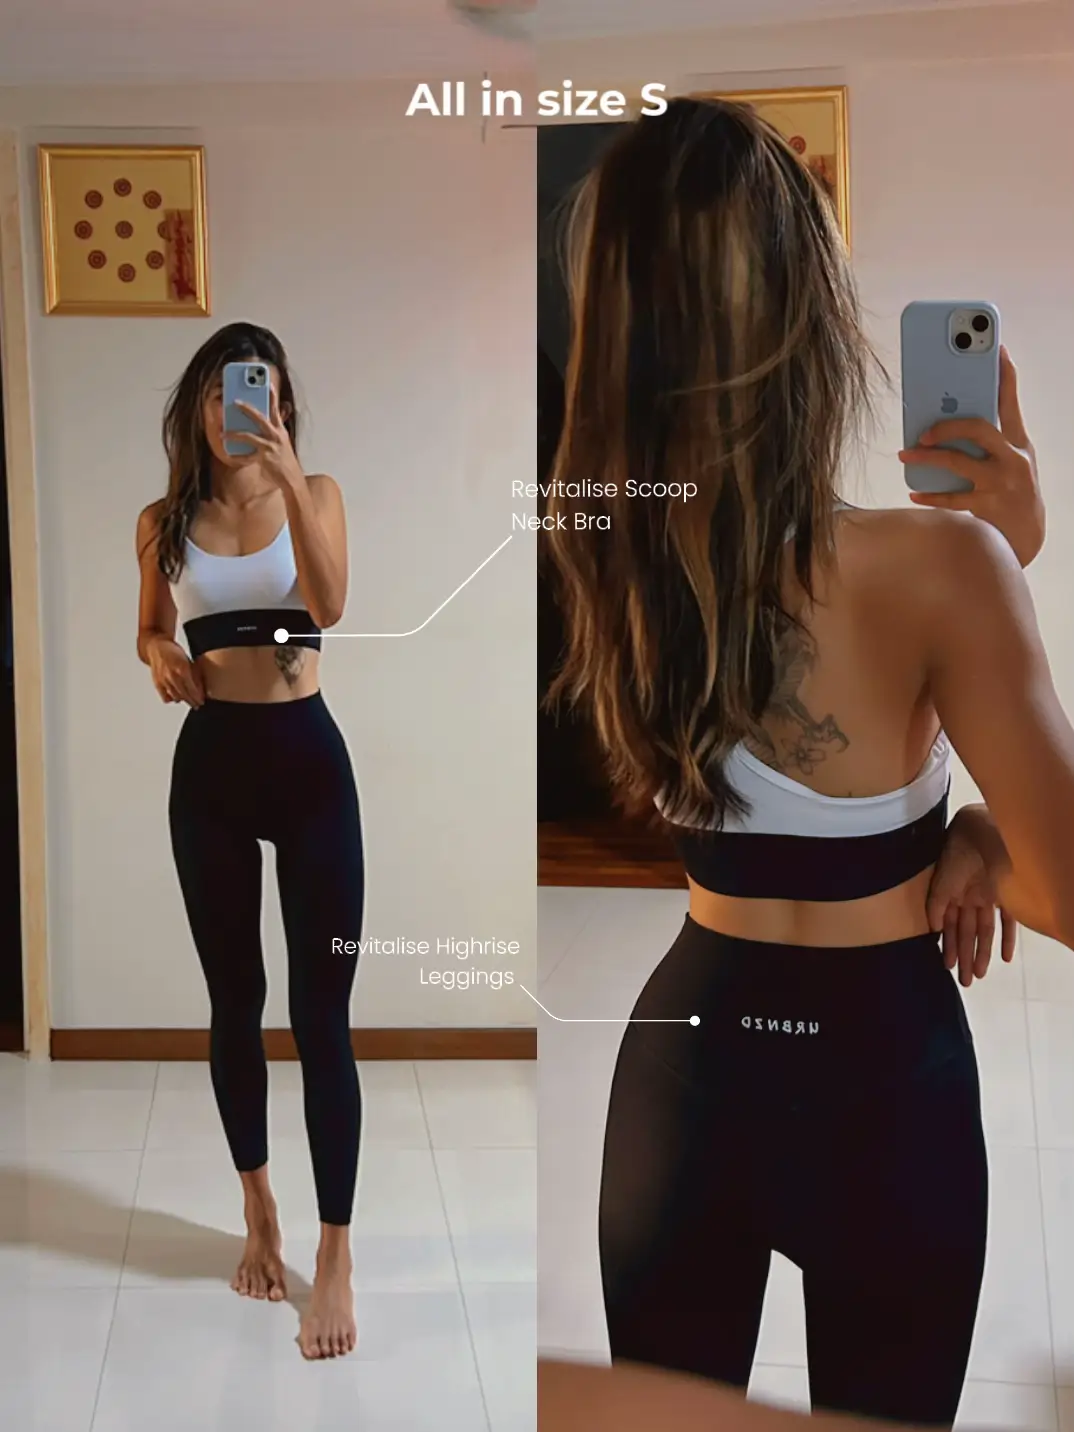 Hope y'all are not sick of all the cacao comparison posts yet cause here's  another one… Aligns Asia fit 24” vs 25” : r/lululemon